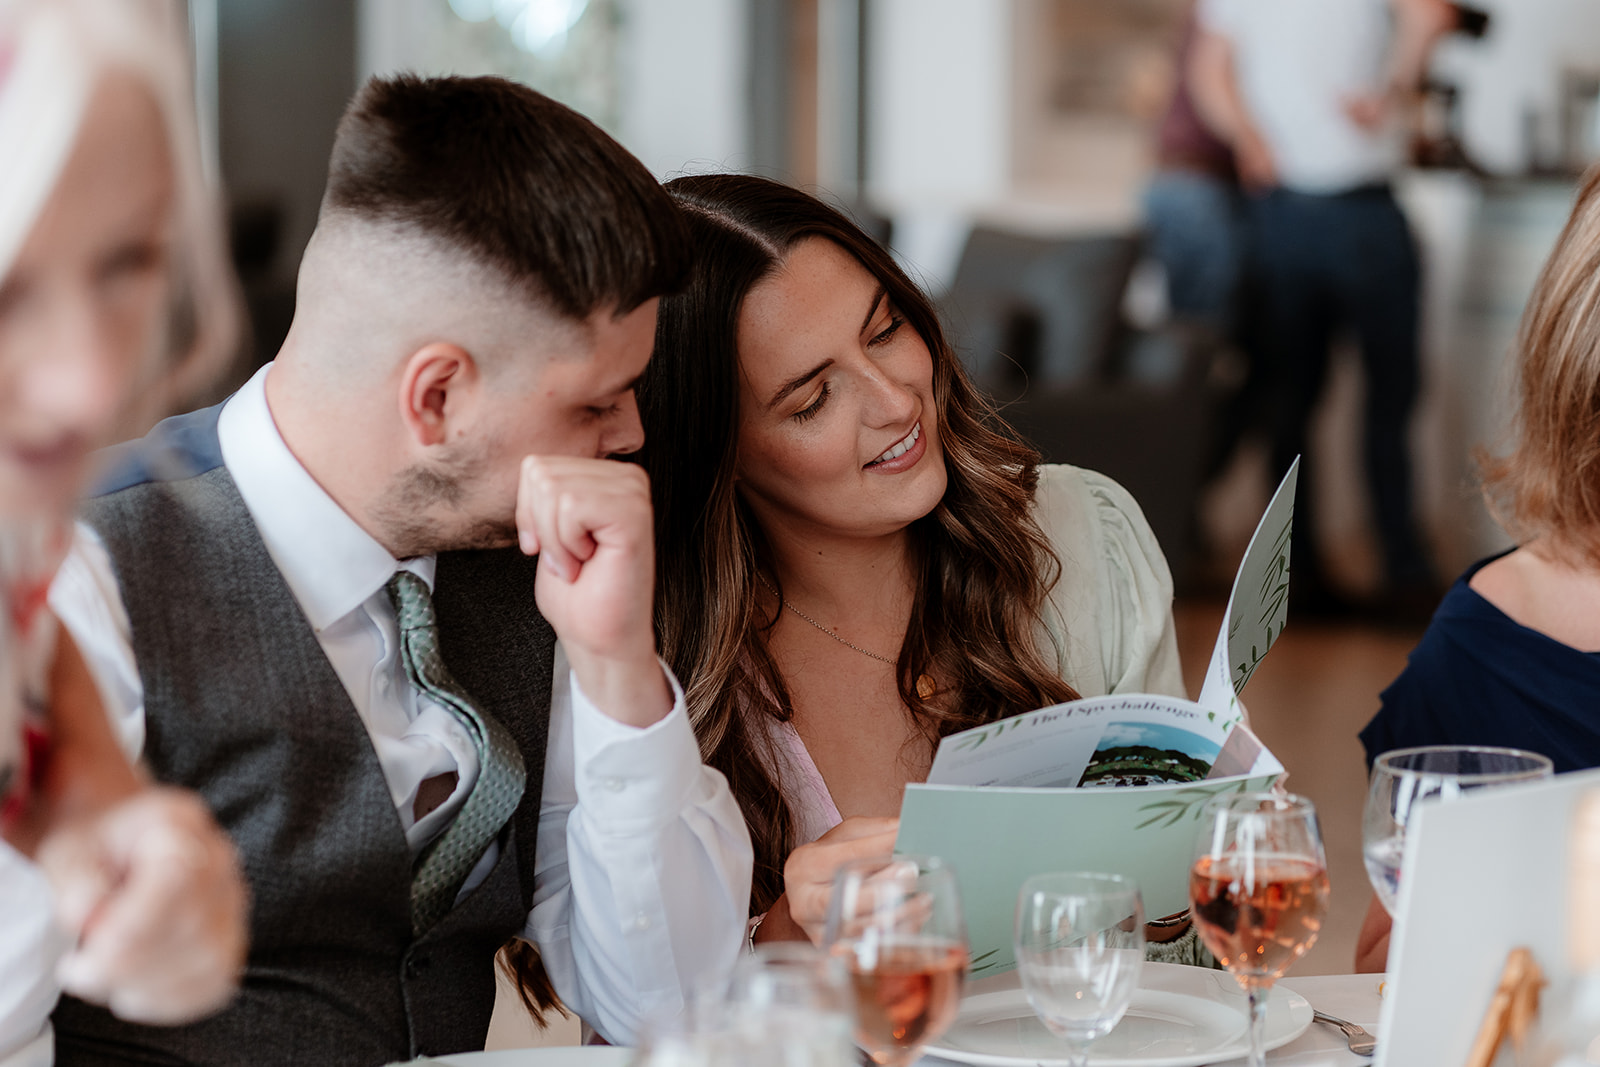 Guests look together at a wedding activity book while at a Sandy Cove Hotel wedding